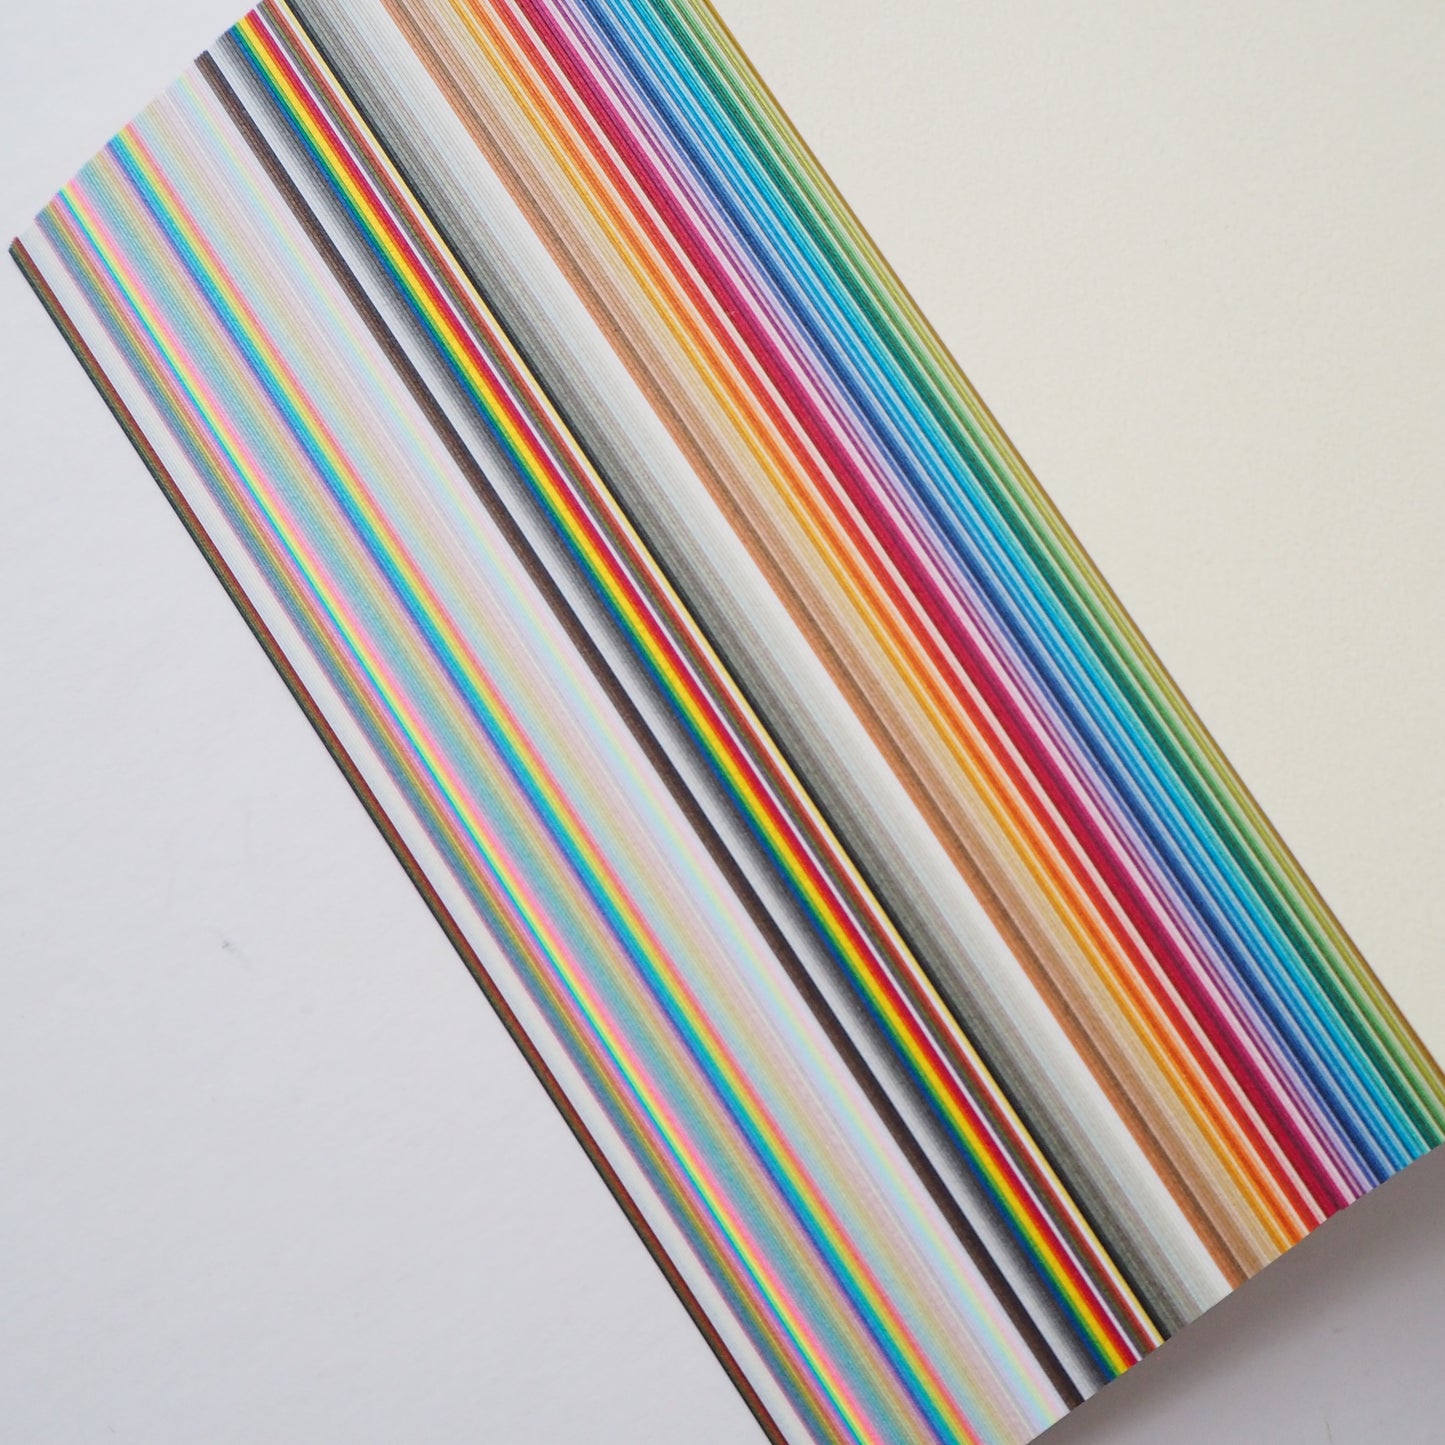 200 Sheets Multicoloured Toyo Tant Origami Paper Pack 15x15cm